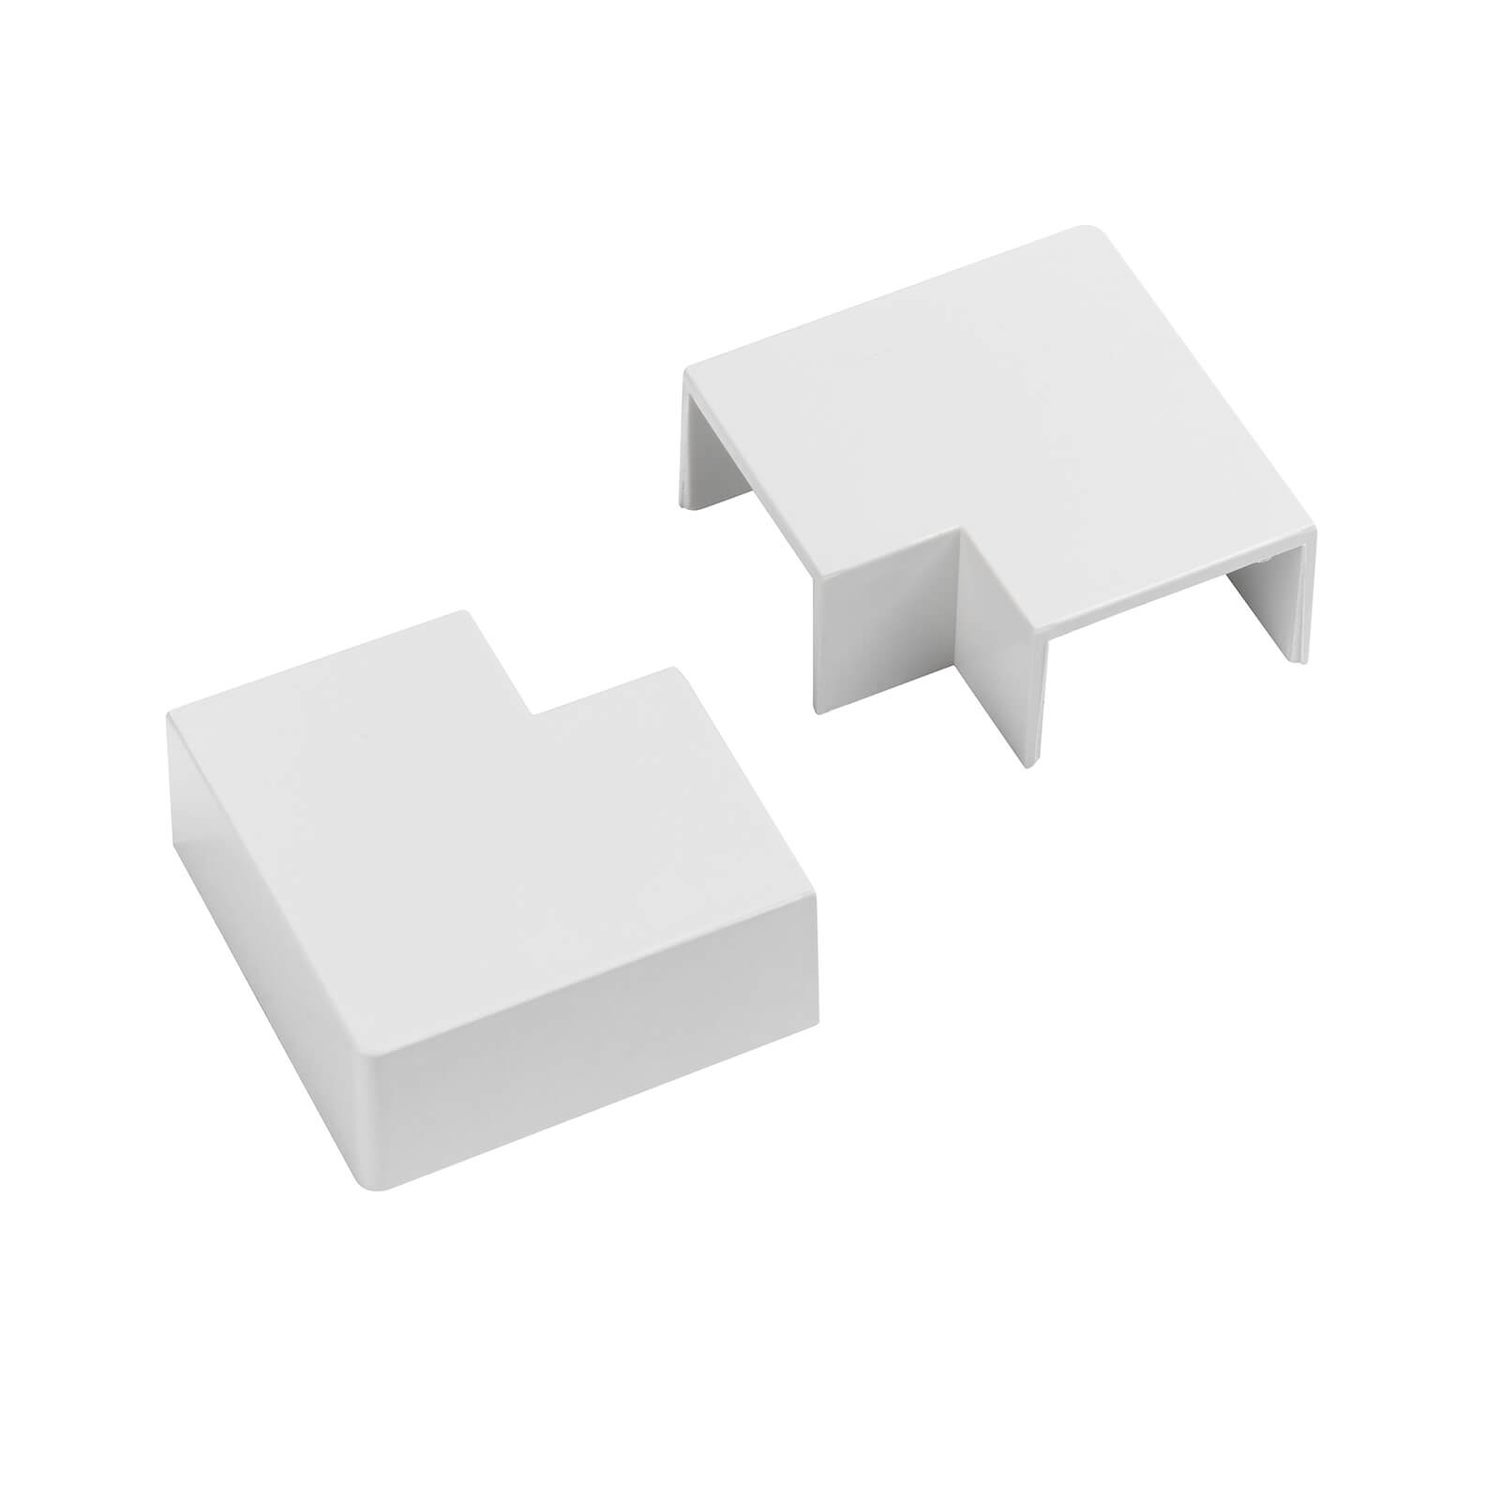 White D-Line 25x16mm Trunking Clip-On Flat Bend 2 Pack 